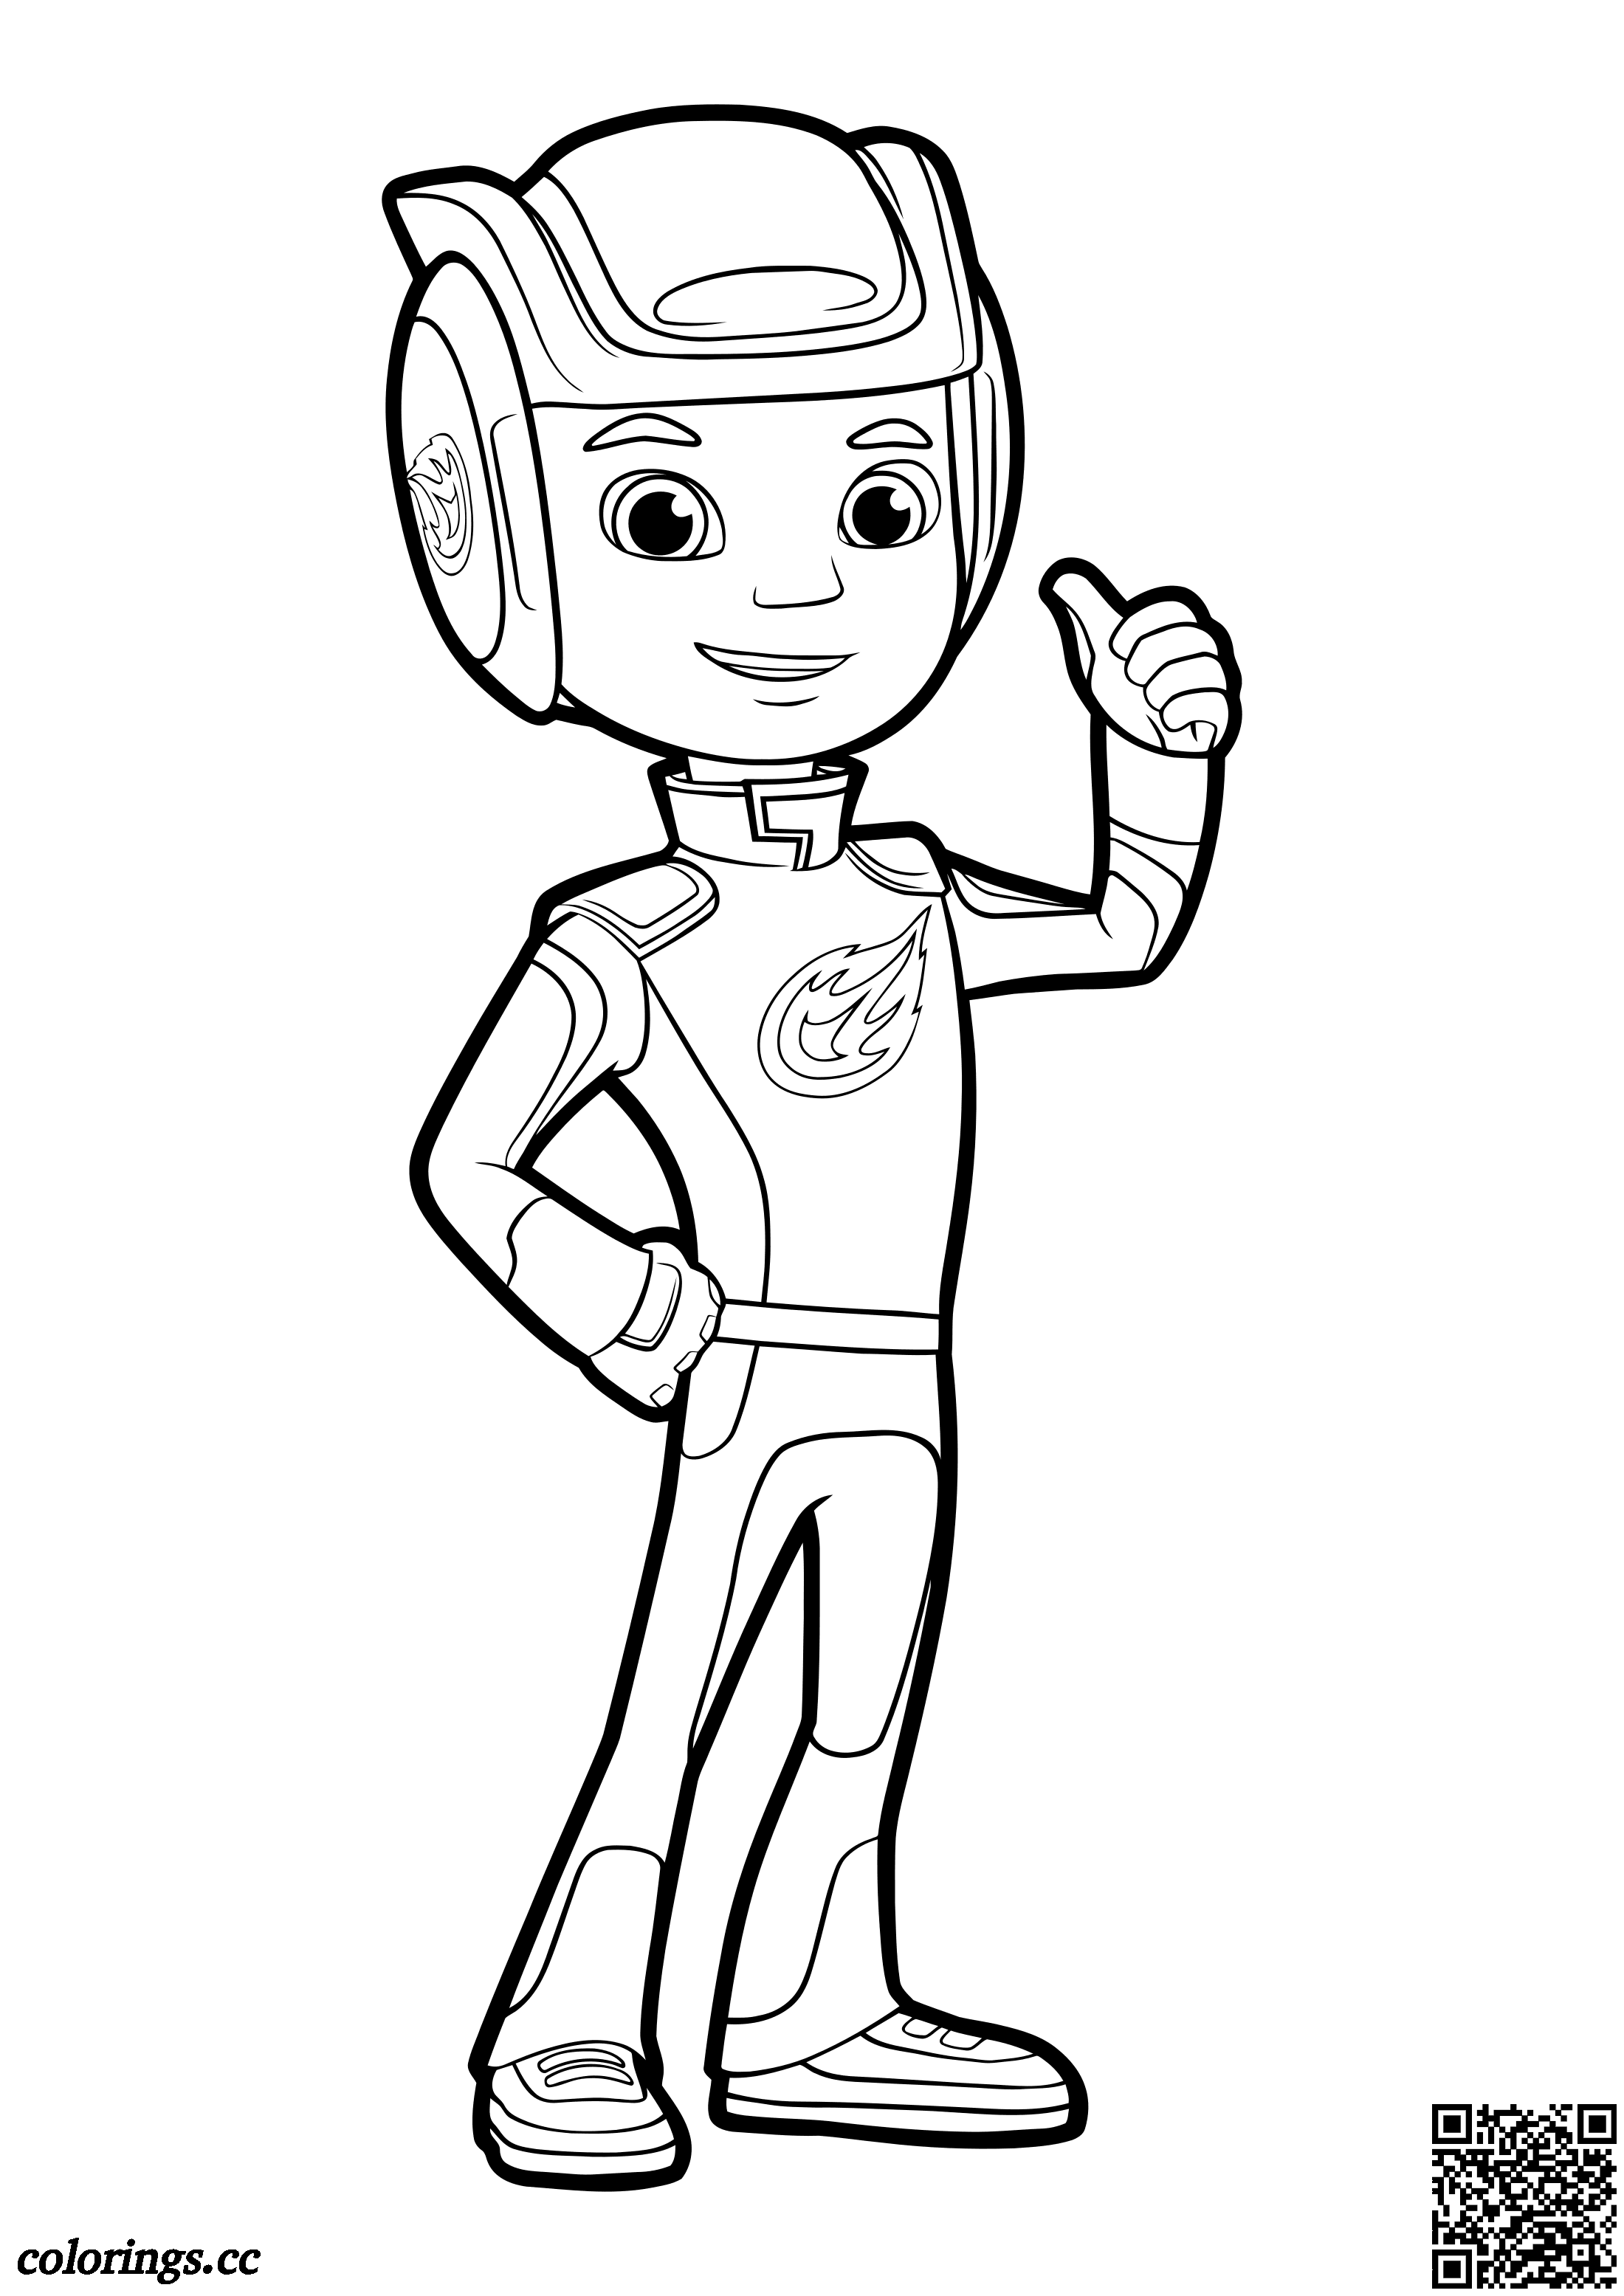 Blaze and the monster machines coloring pages  Desenhos para colorir carros,  Carros para colorir, Desenhos para colorir